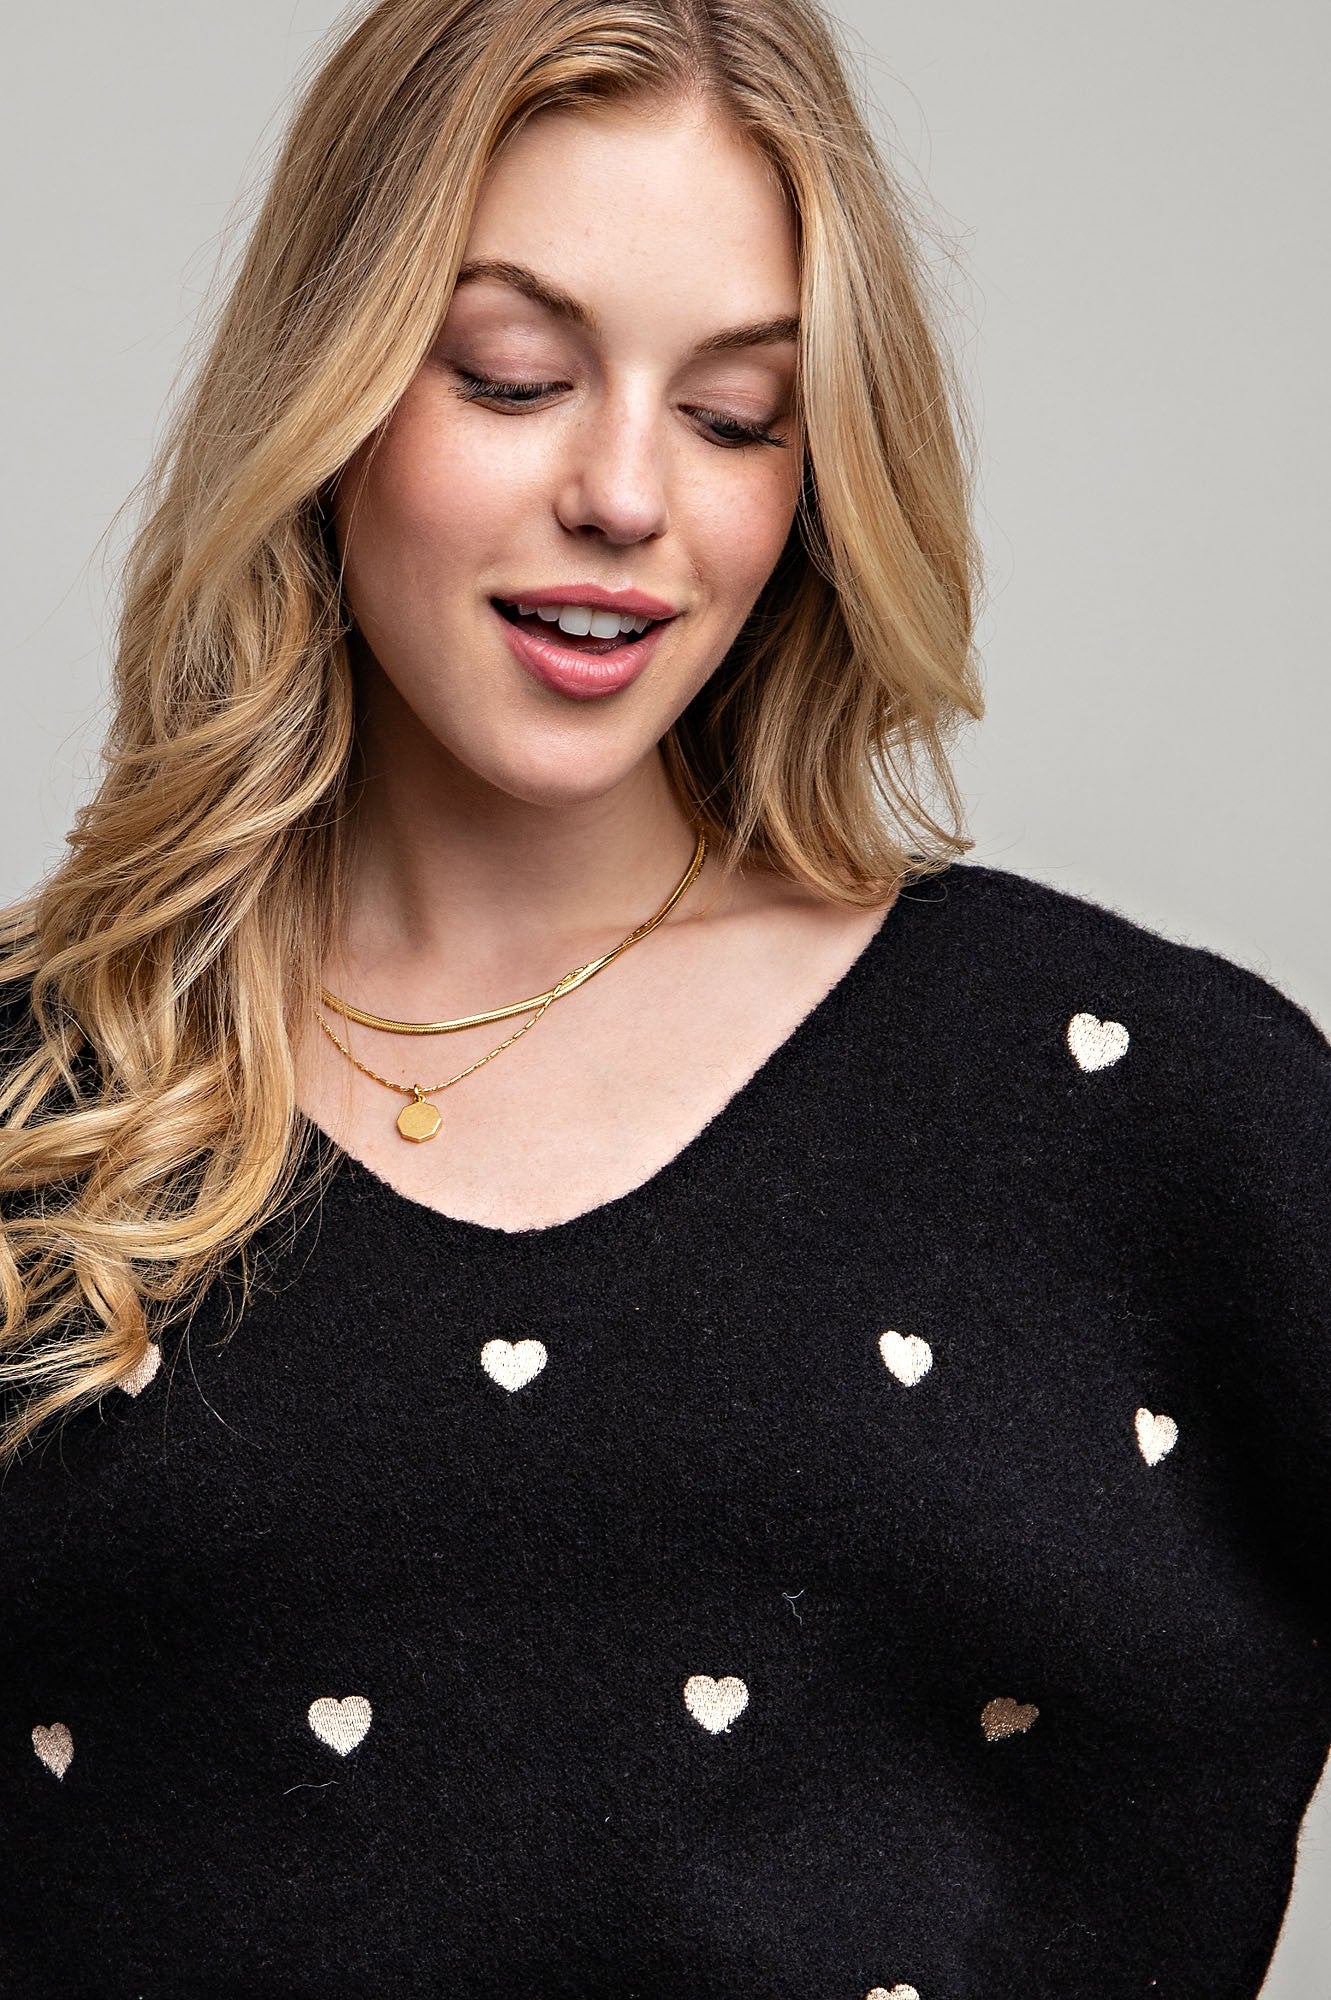 EMBROIDERED HEART BOXY SWEATER / Black